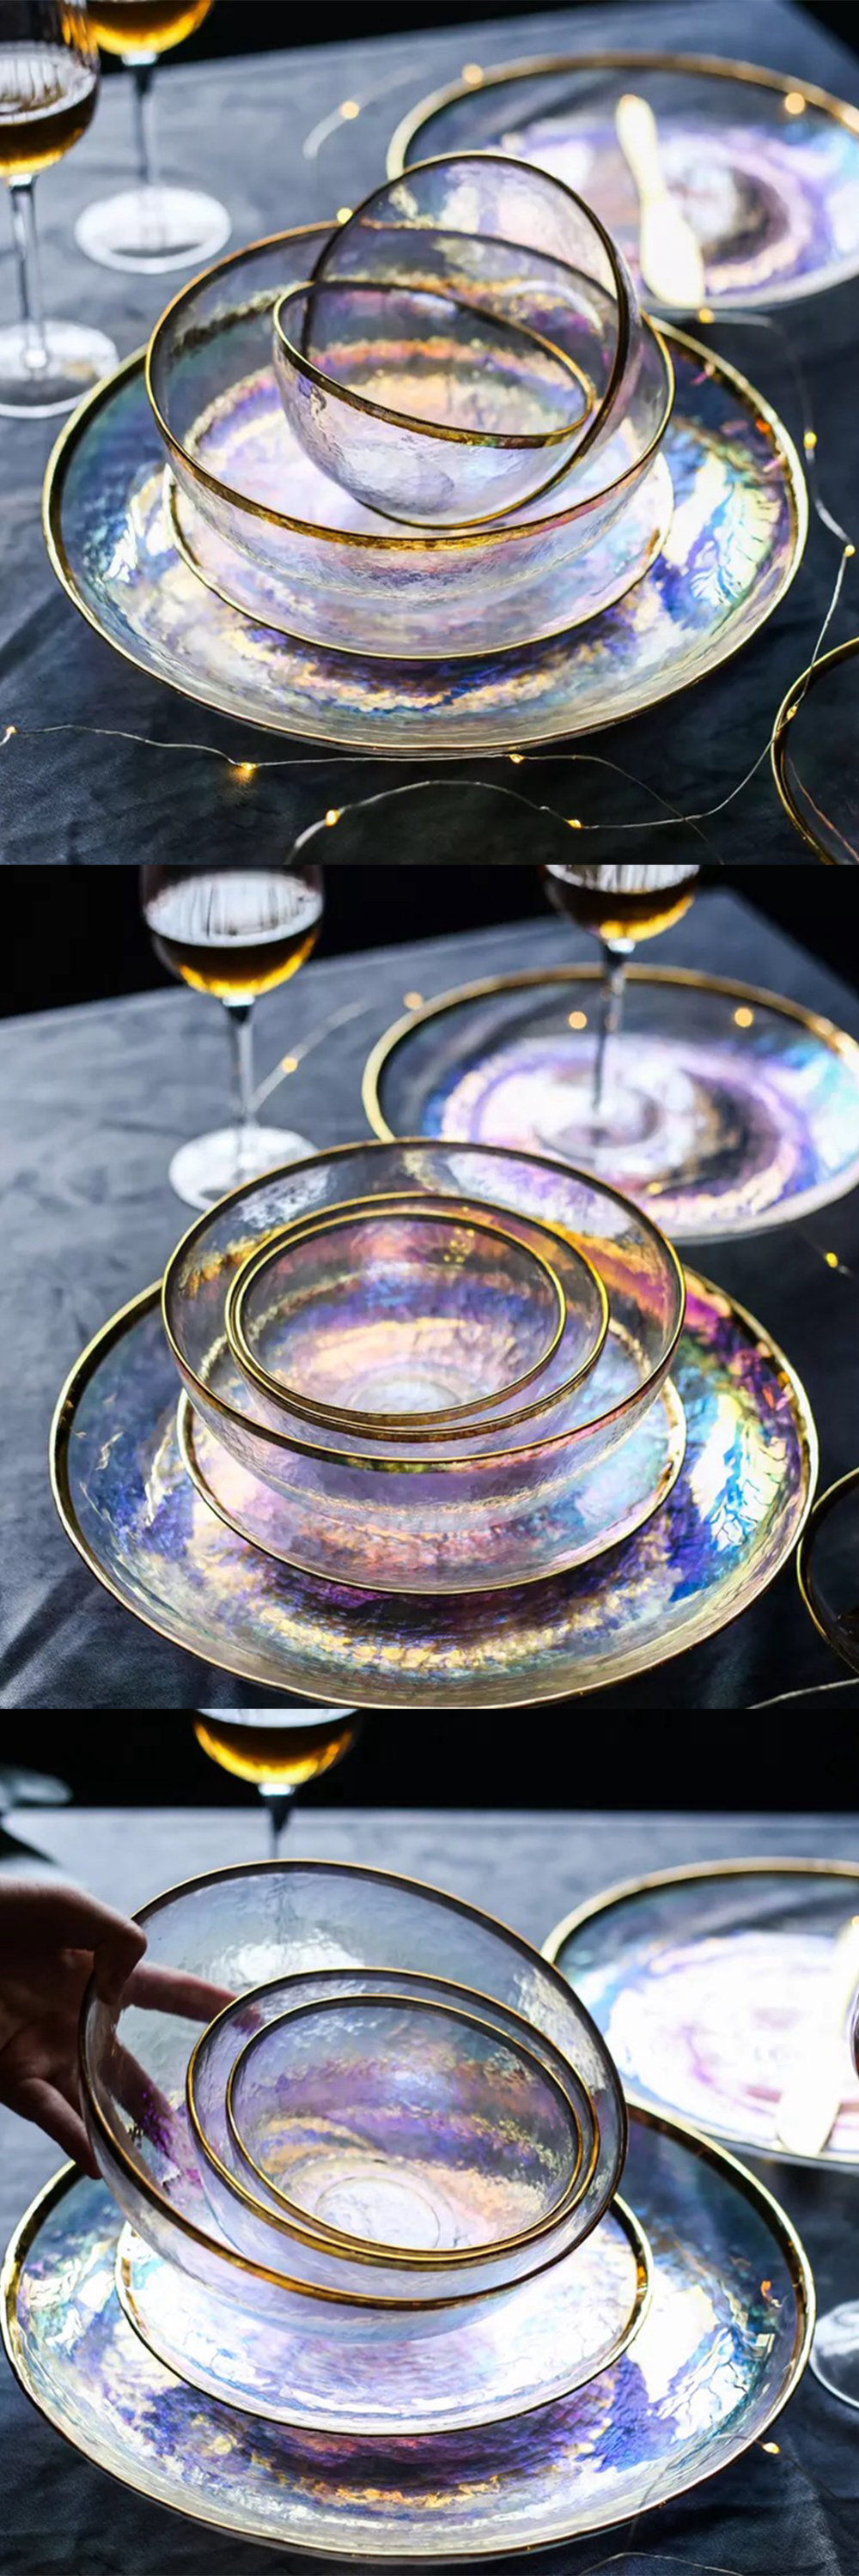 Details about   Beautiful Gold Rimmed Rainbow Glass Plates 